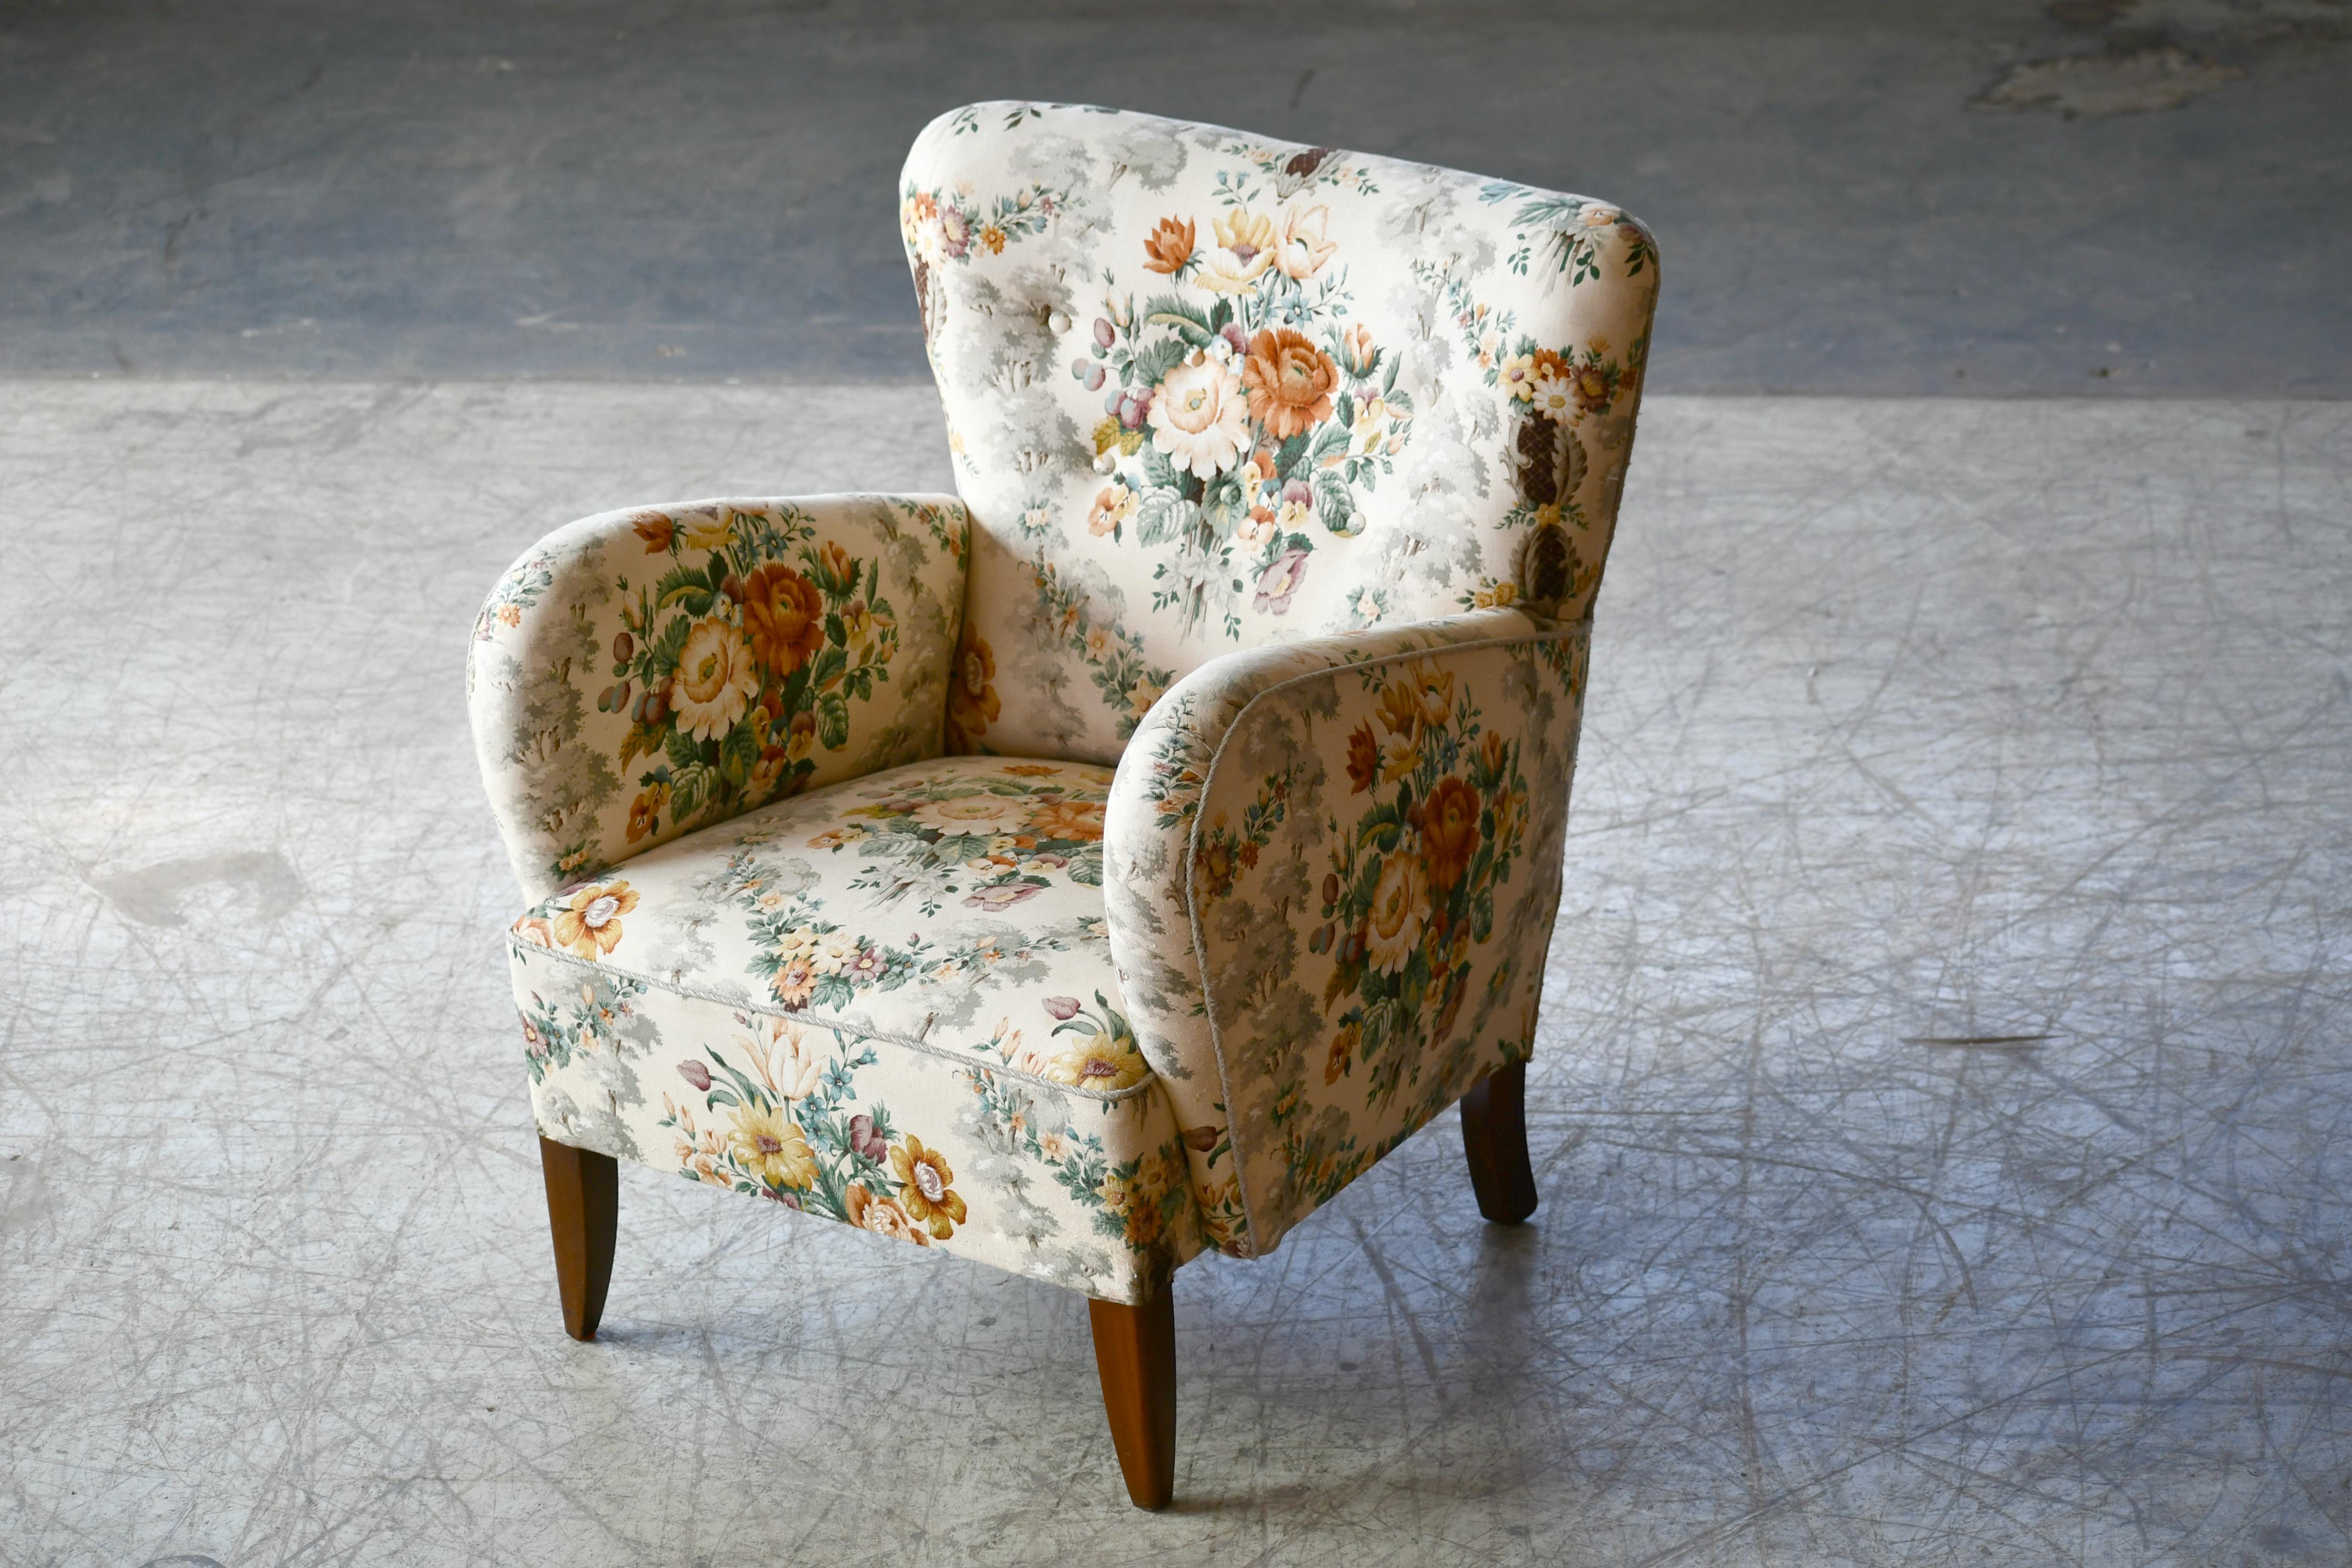 Cotton Danish Midcentury 1940s Flemming Lassen Style Lounge Chair in Floral Fabric